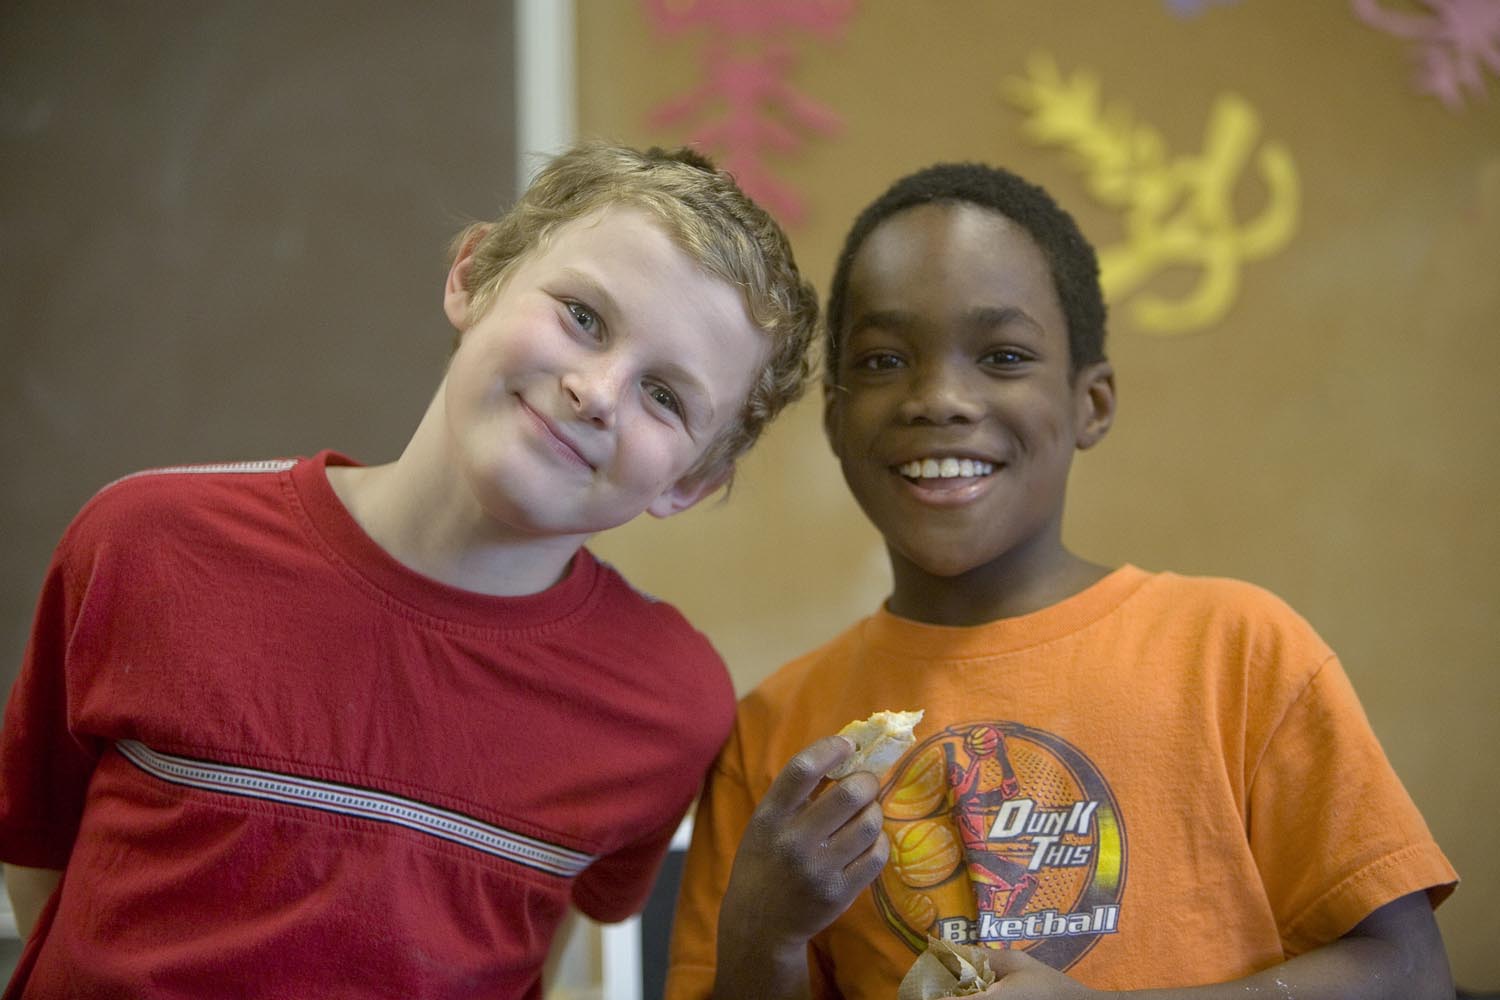 A color photo of two children, one white male, one black male, smiling at the camera